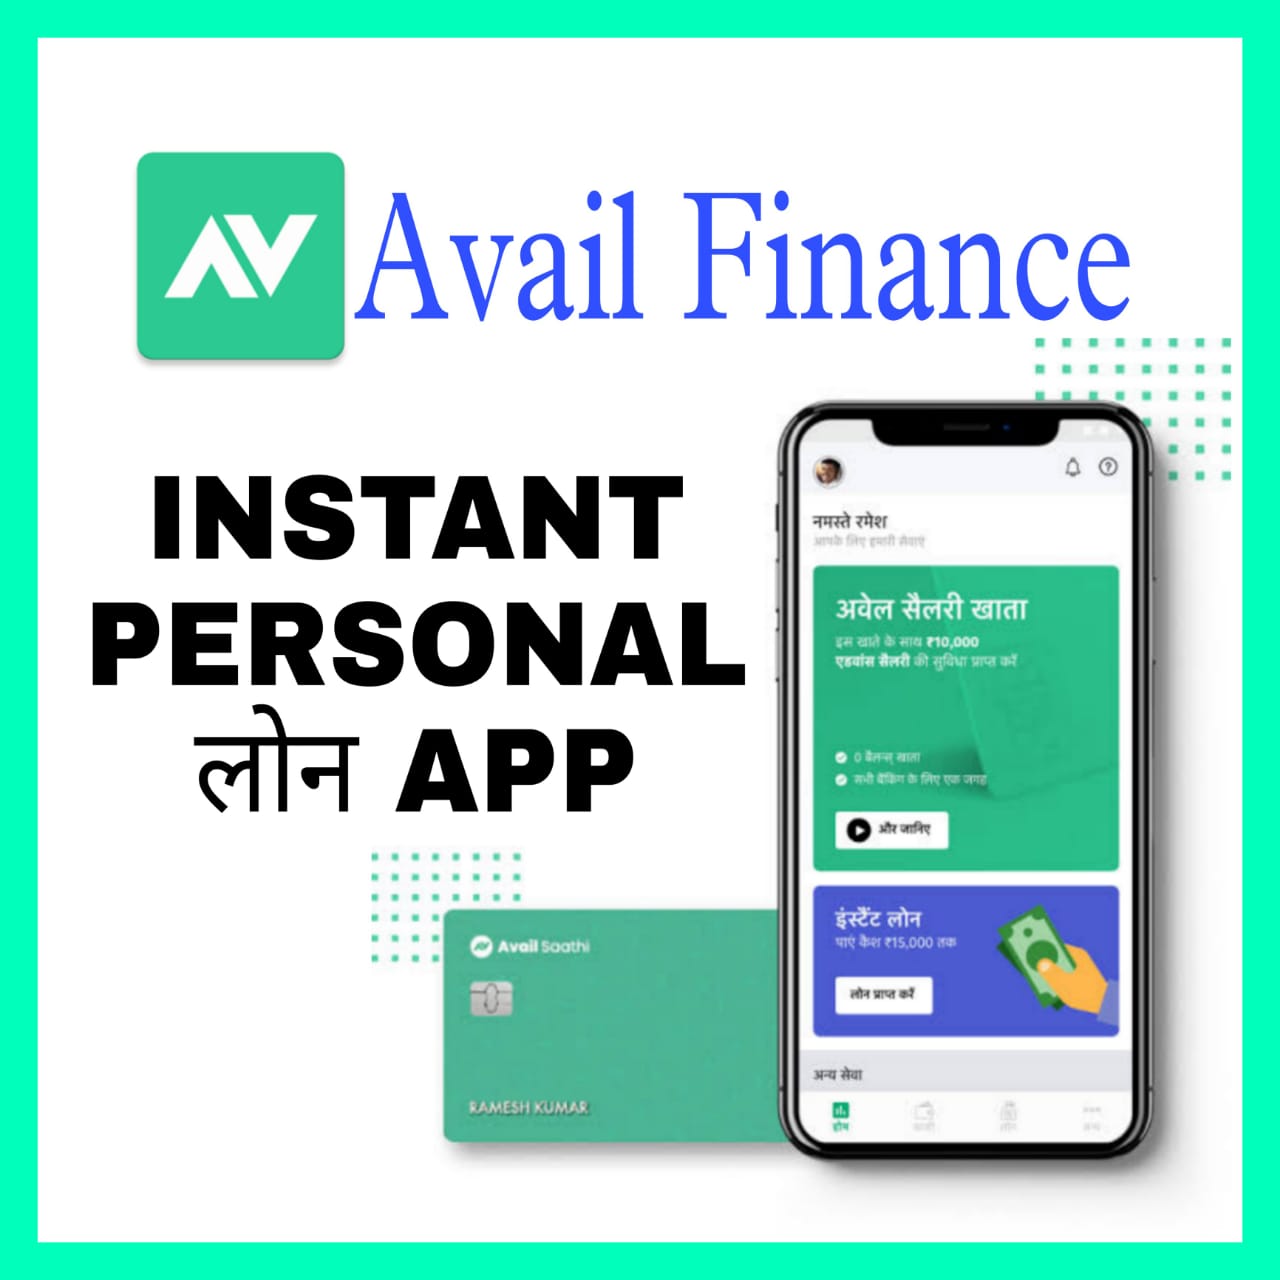 Avail Finance Customer care Number | Avail Finance loan App